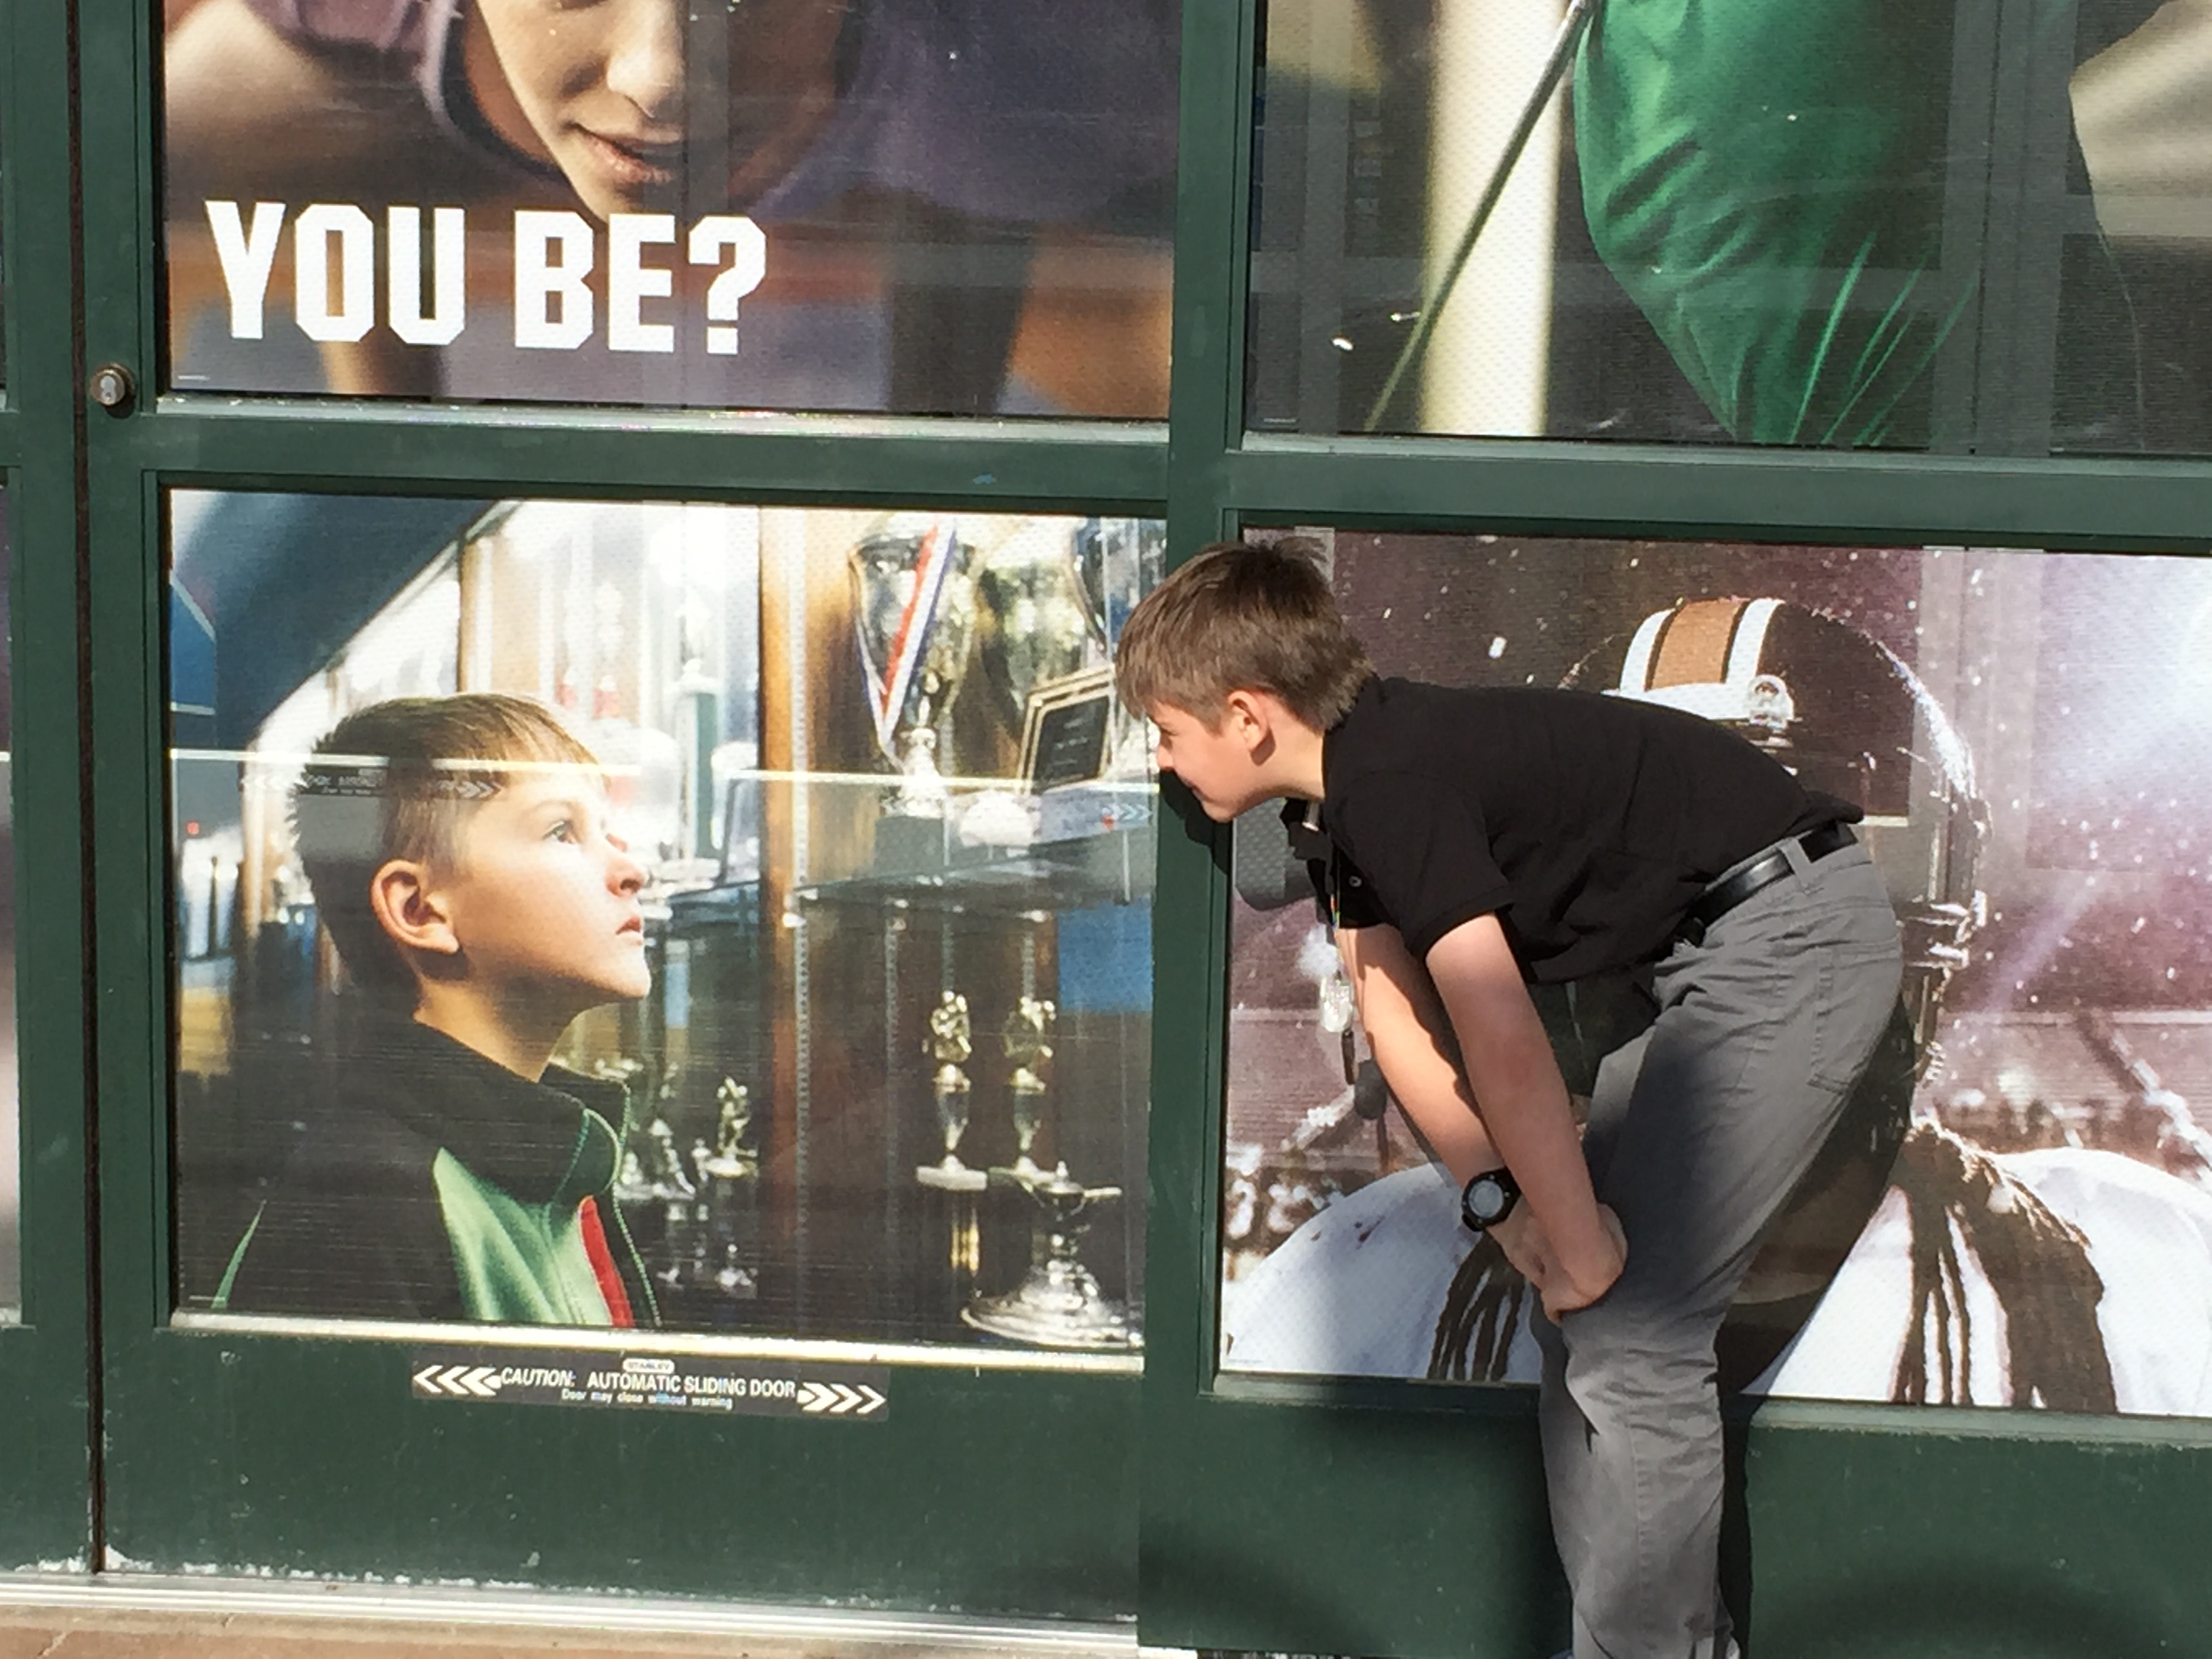 Jack admiring a still photo of himself on the front door of Dicks Sporting Goods (2015)